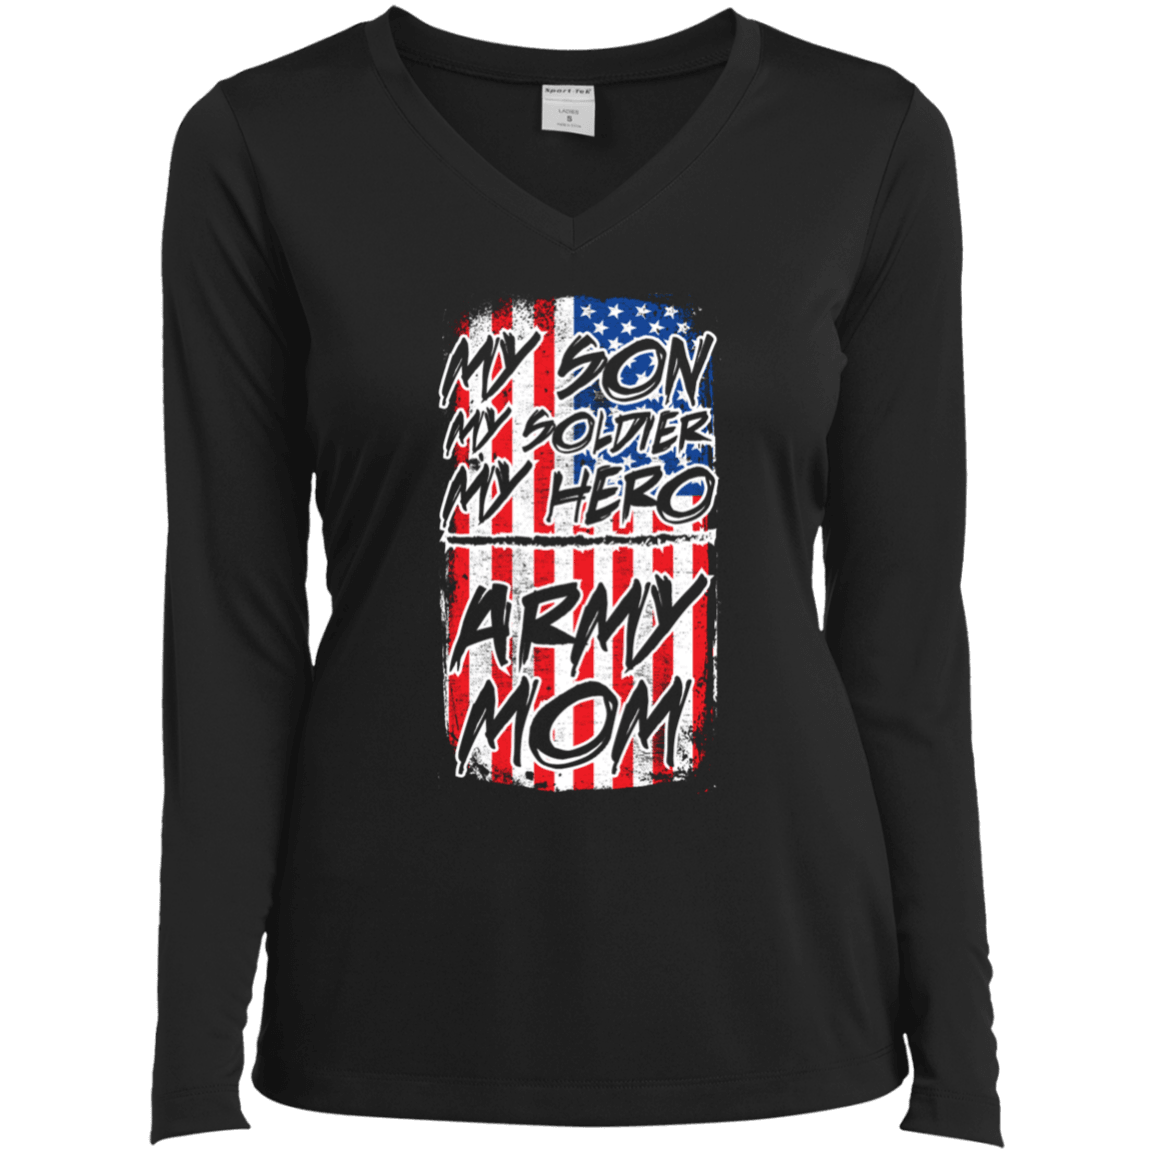 Designs by MyUtopia Shout Out:My Son My Soldier My Hero Army Mom Ladies' Long Sleeve V-Neck T-Shirt,X-Small / Black,Long Sleeve T-Shirts